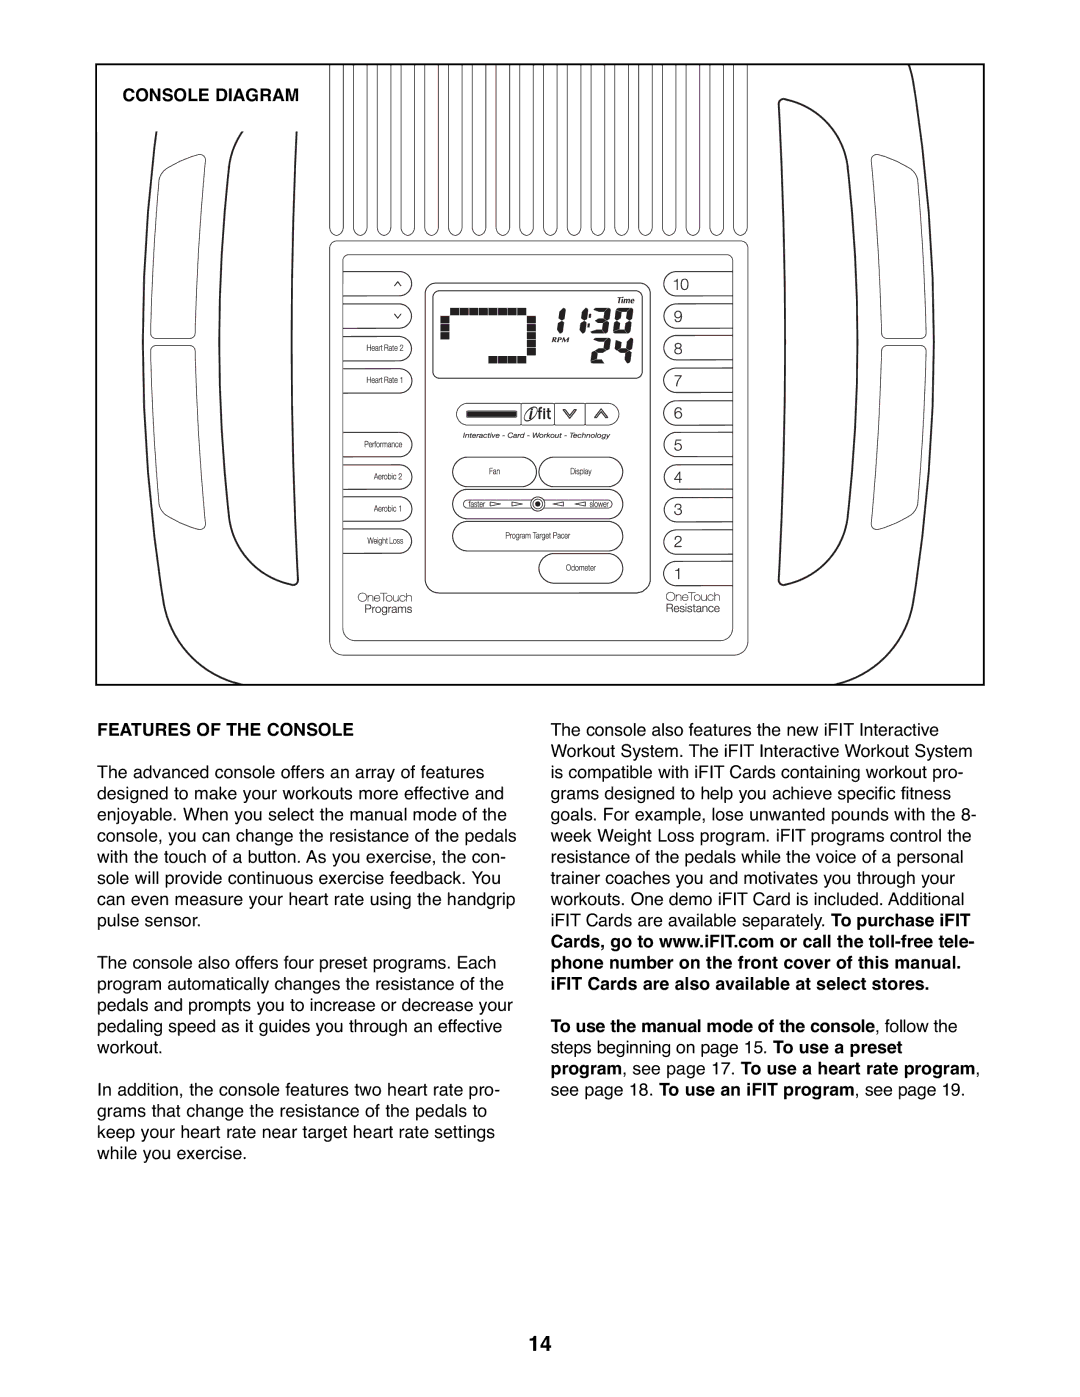 NordicTrack NTEL7506.2 user manual Console Diagram Features of the Console 